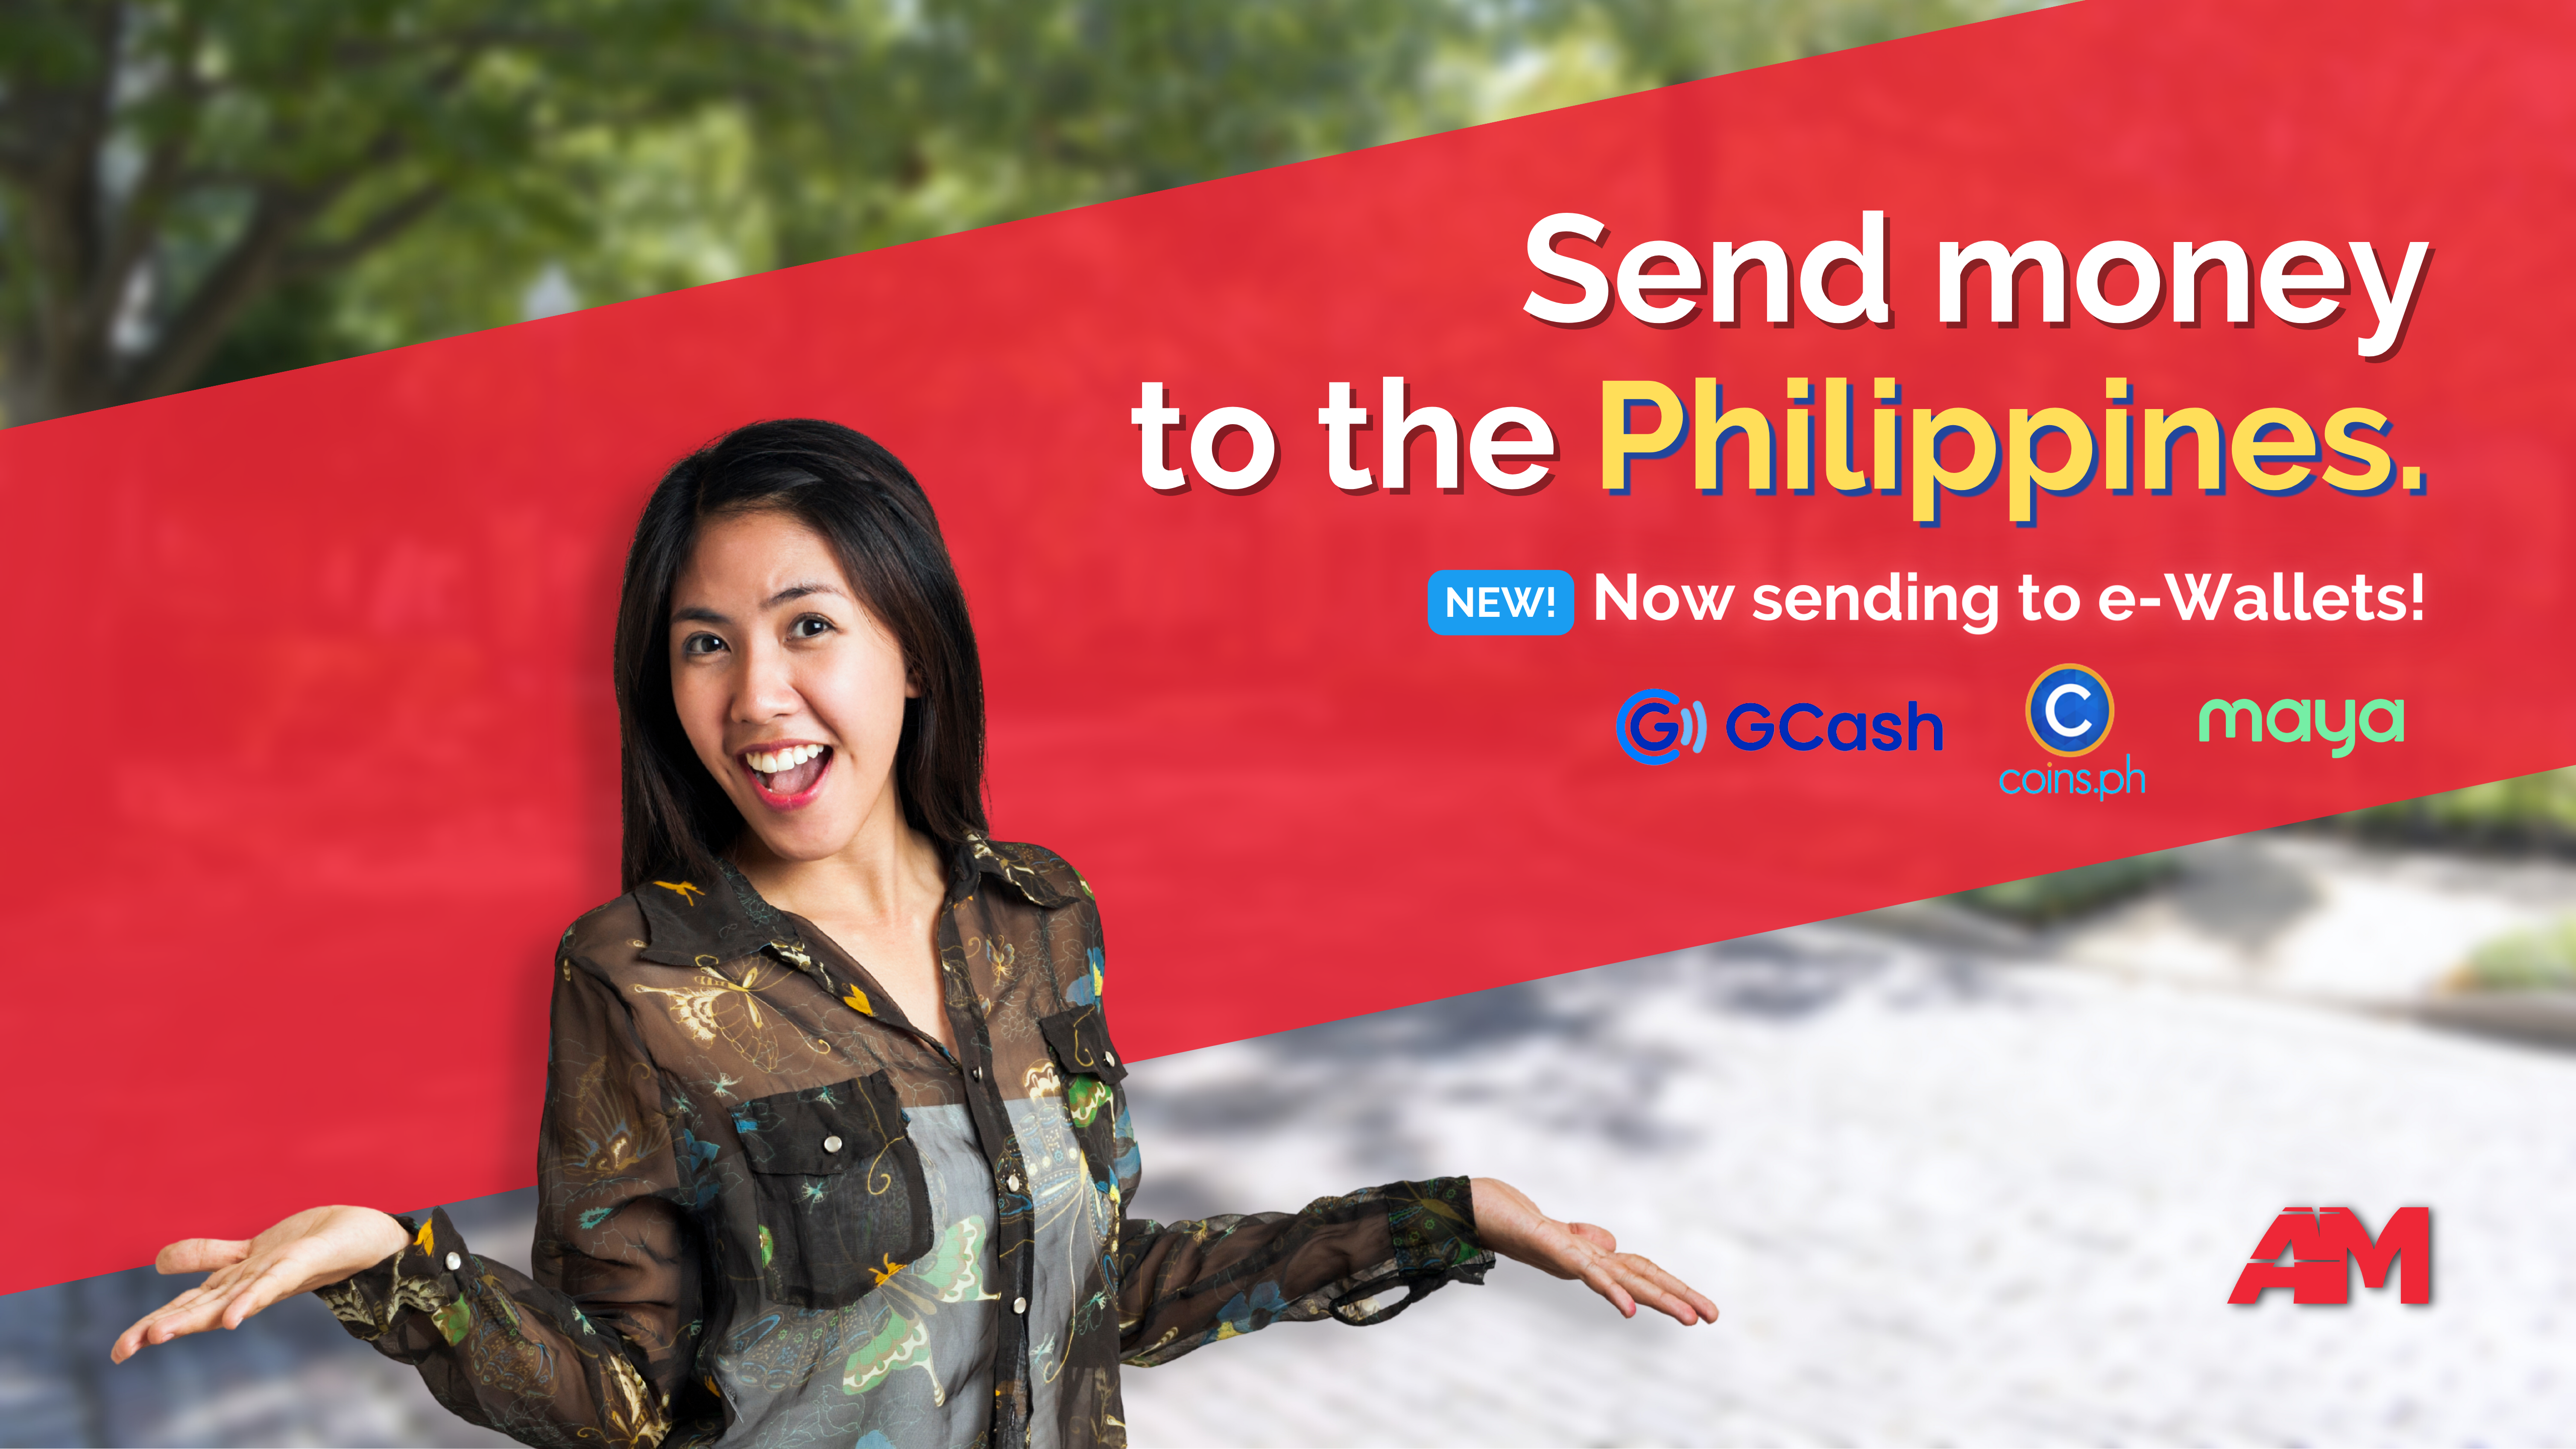 Now Sending to Philippines’ e-Wallets!